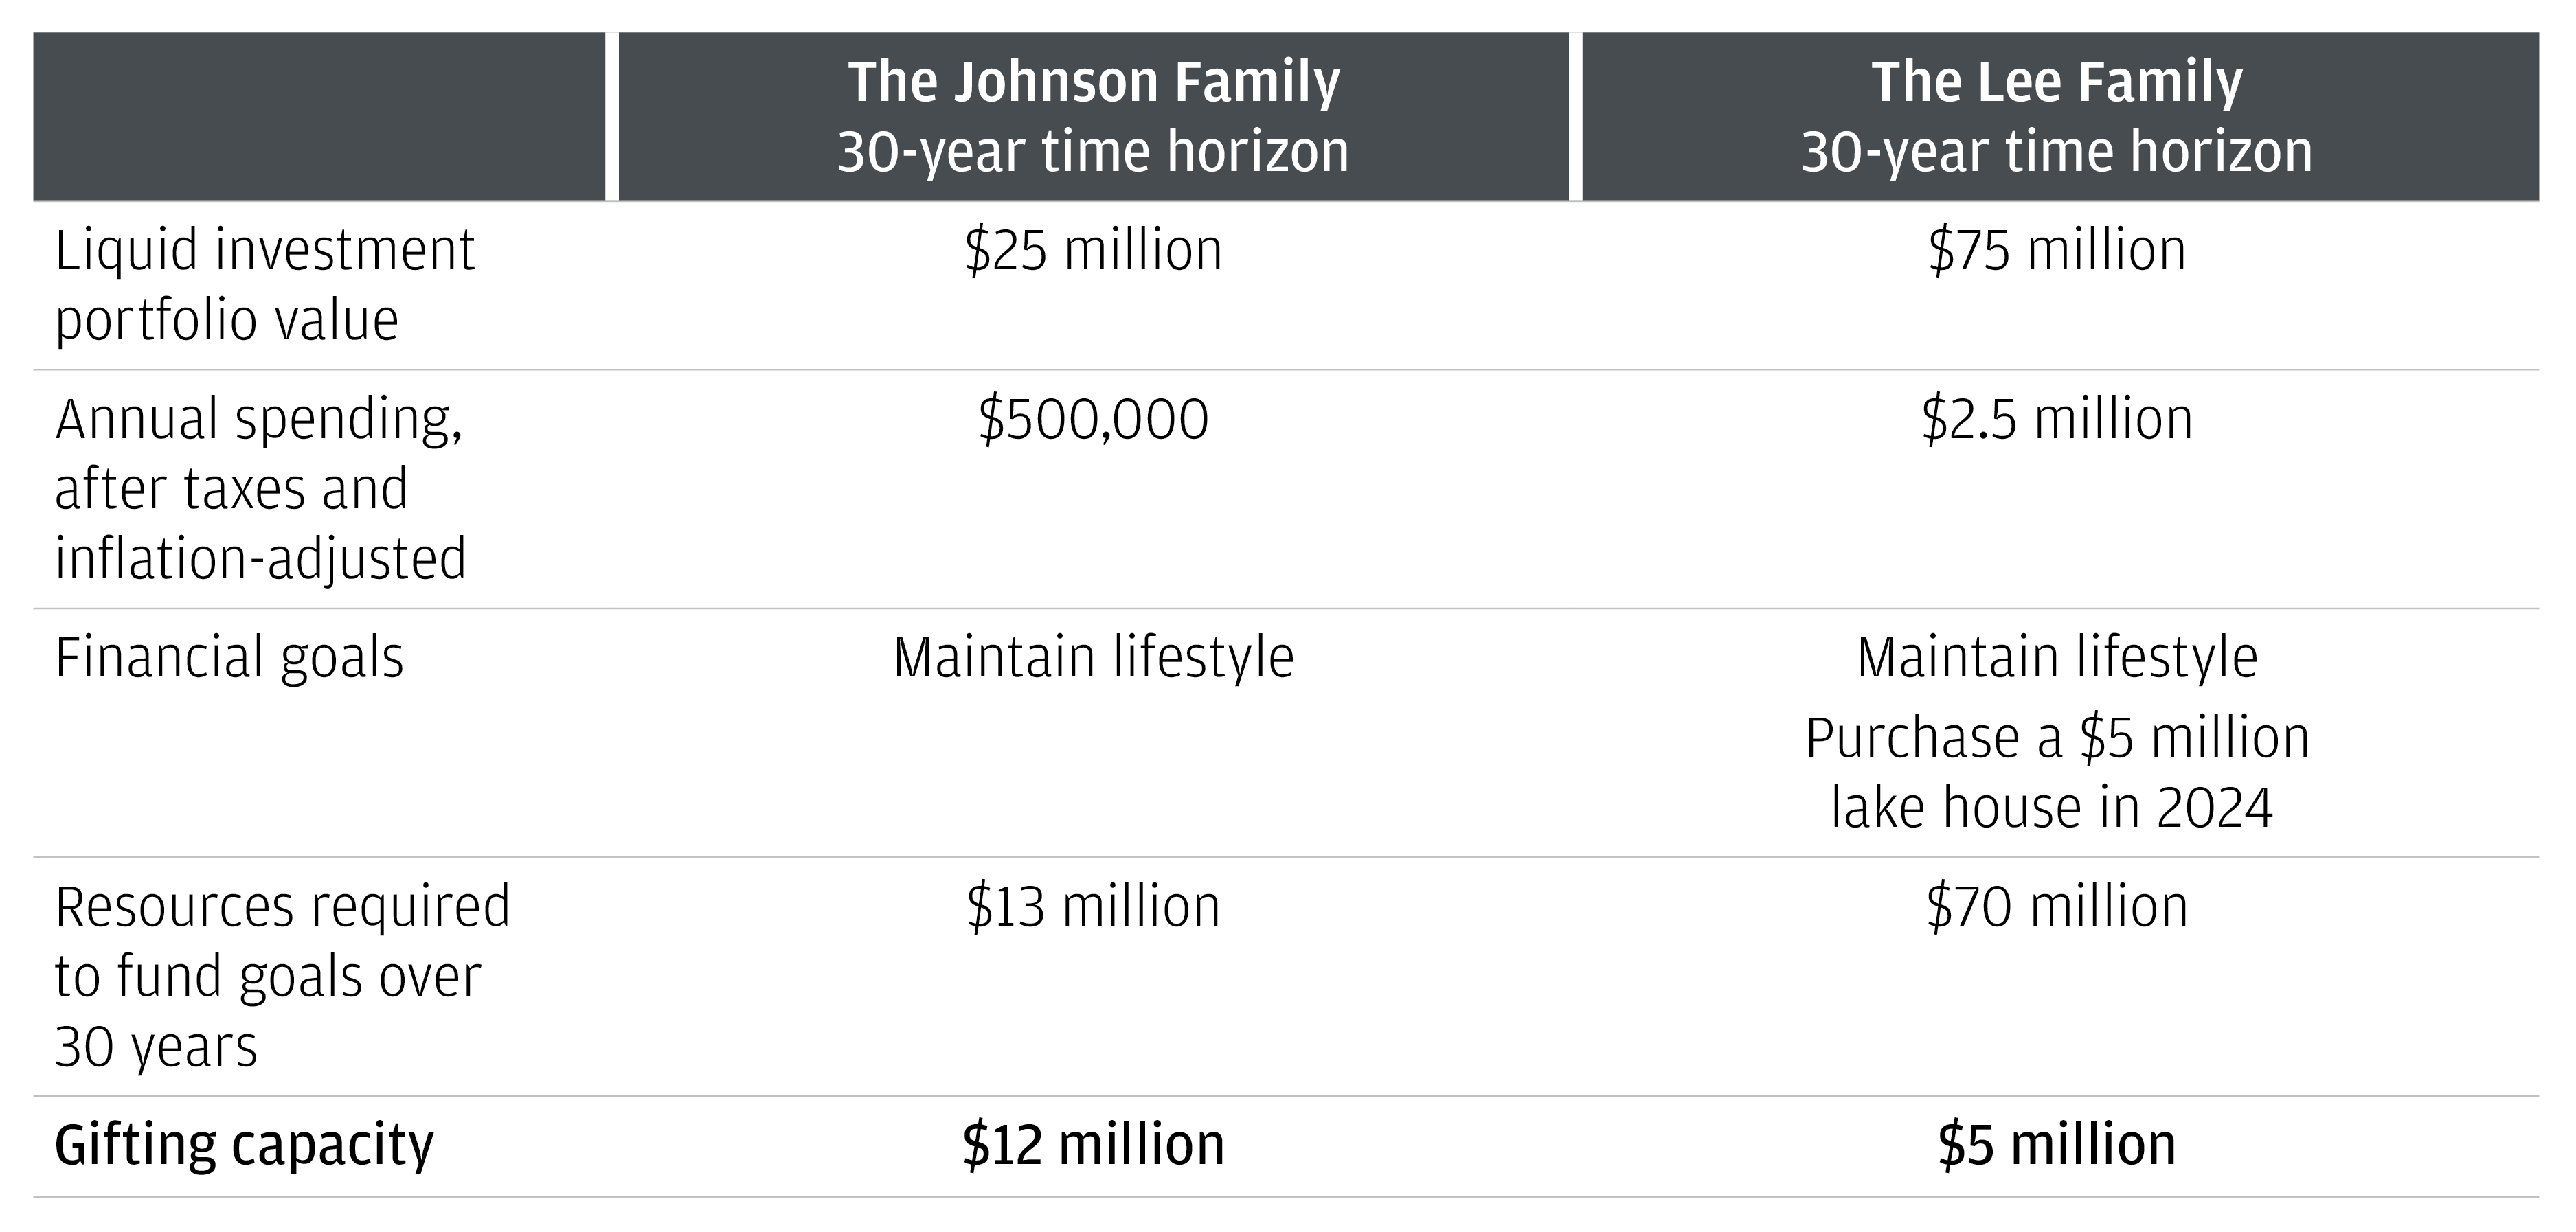 This table compares two families (the Johnson family and the Lee family) and shows how they should calculate gifting capacity through liquid investment portfolio value, annual spending, financial goals, and resources required to fund goals over 30 years.